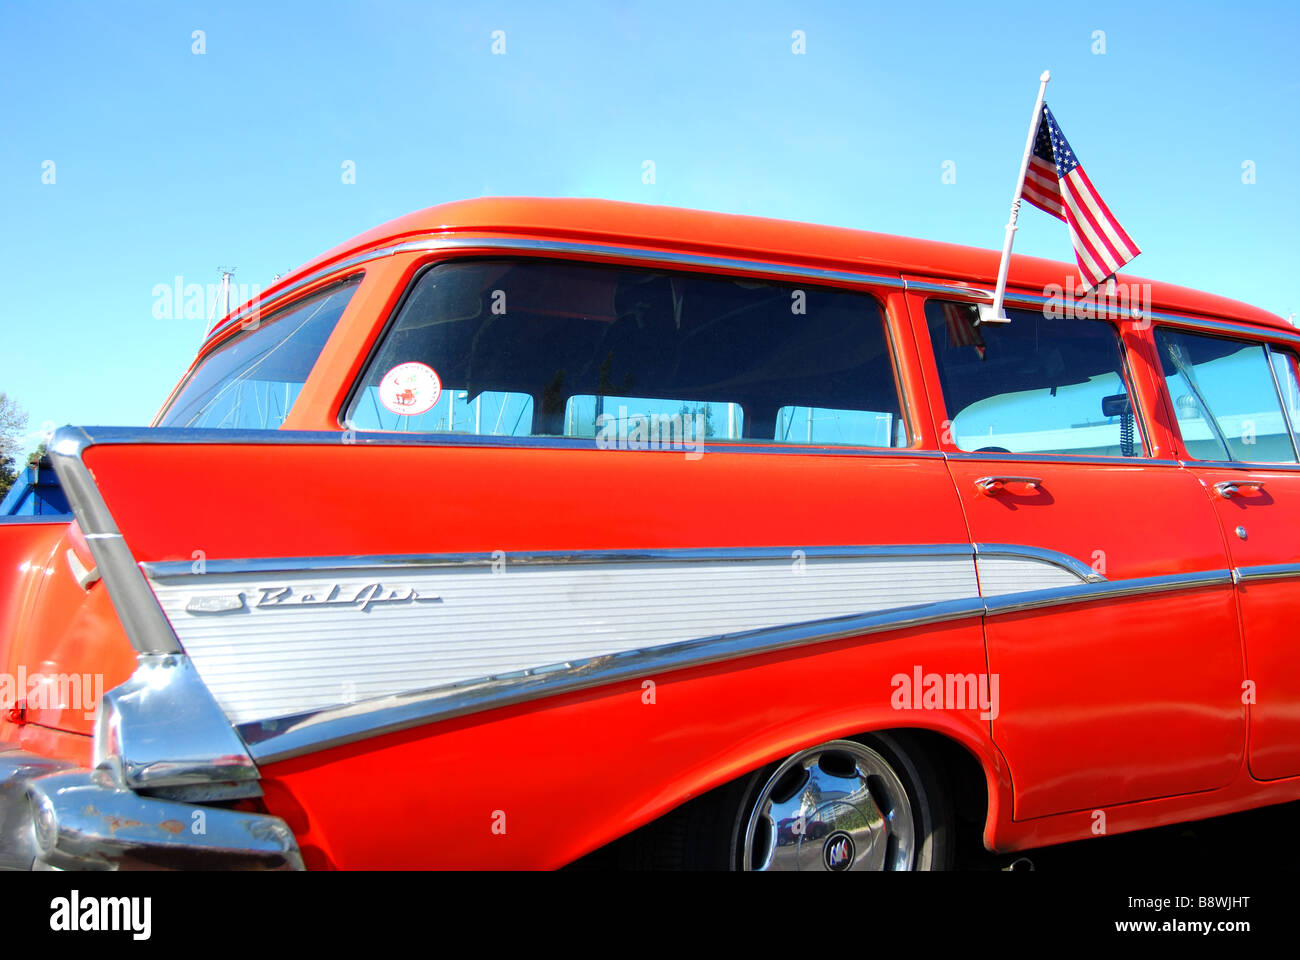 Wing of Chevrolet Bel Air classic 60's car, Marina del Rey, Los Angeles, California, United States of America Stock Photo